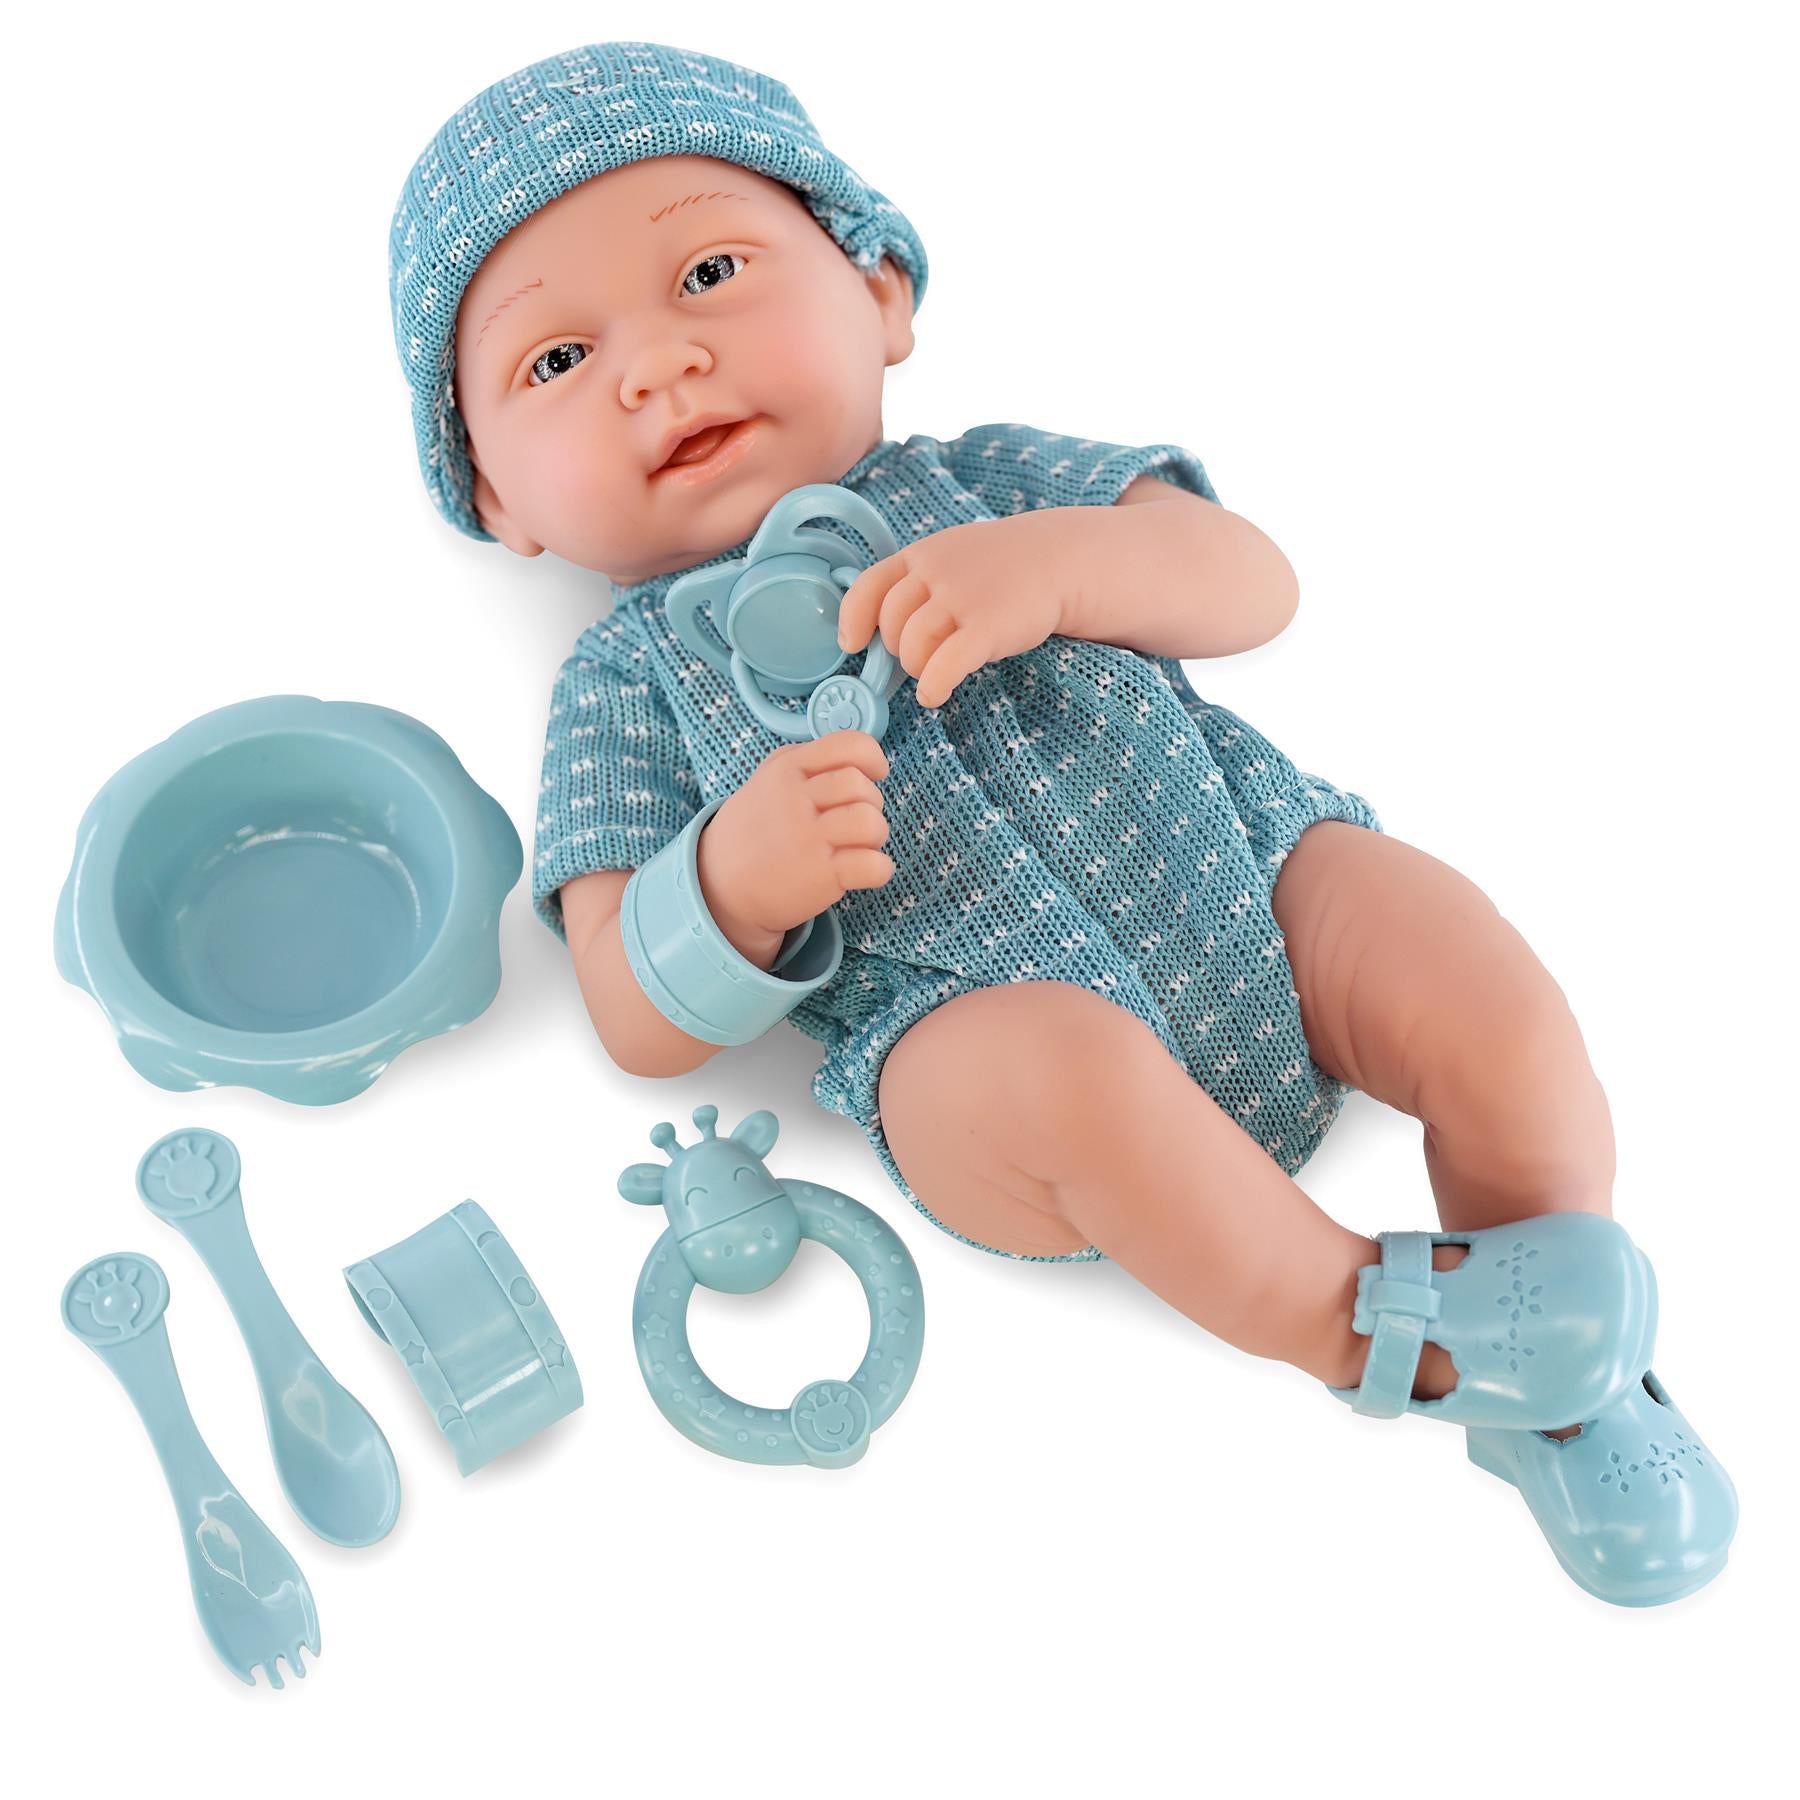 The Magic Toy Shop Baby Doll with Accessories 14" Newborn Baby Boy Doll